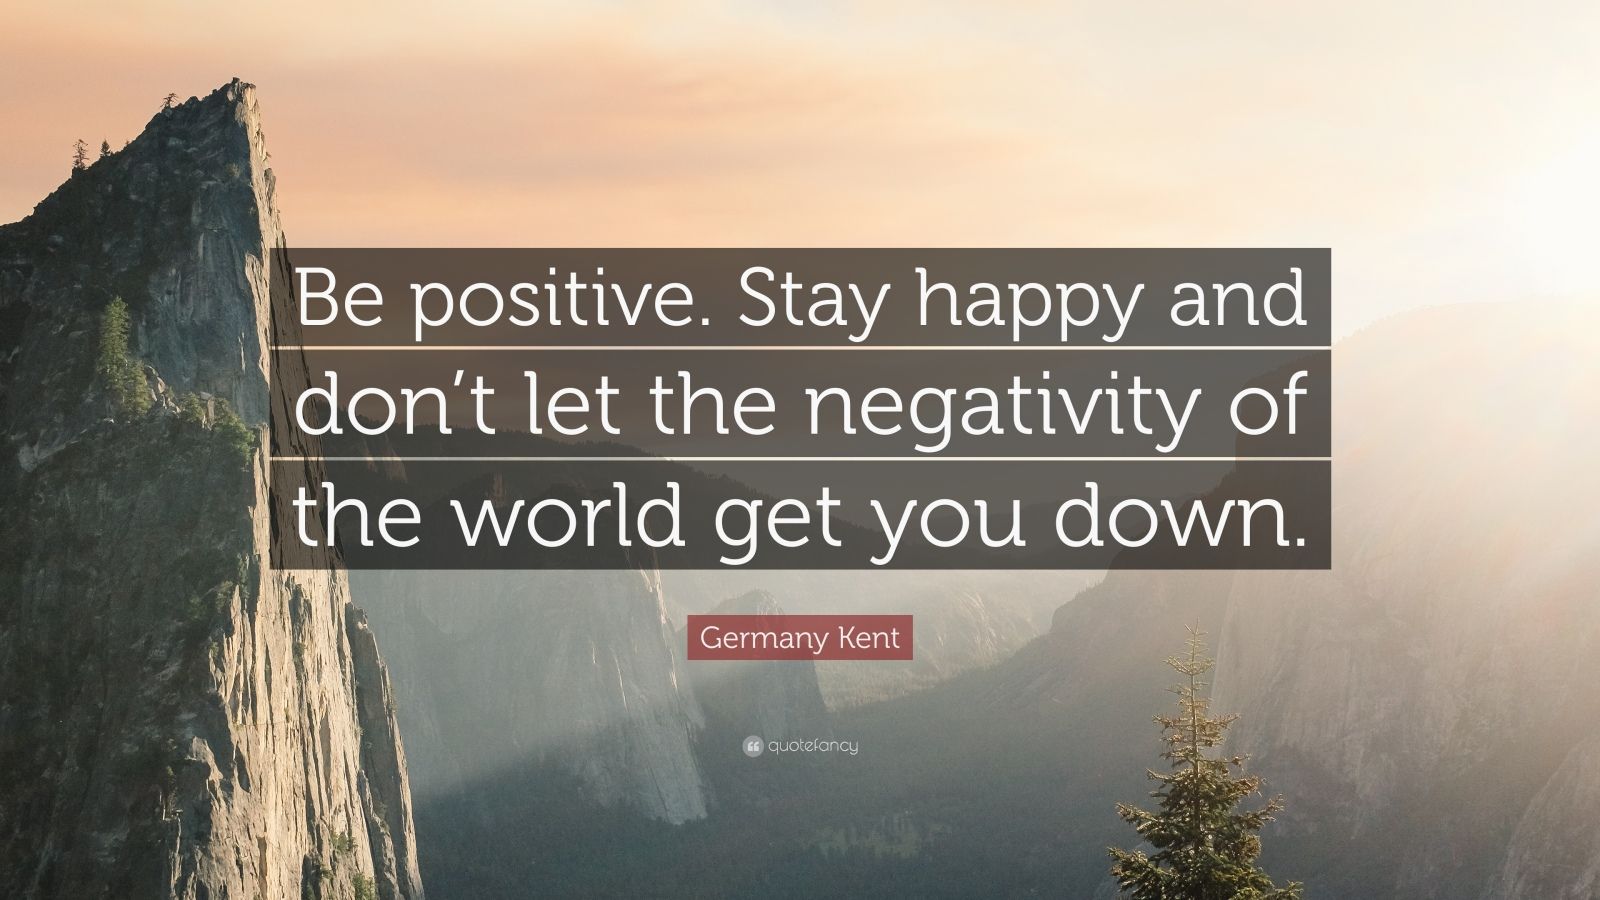 Germany Kent Quote: “Be positive. Stay happy and don’t let the